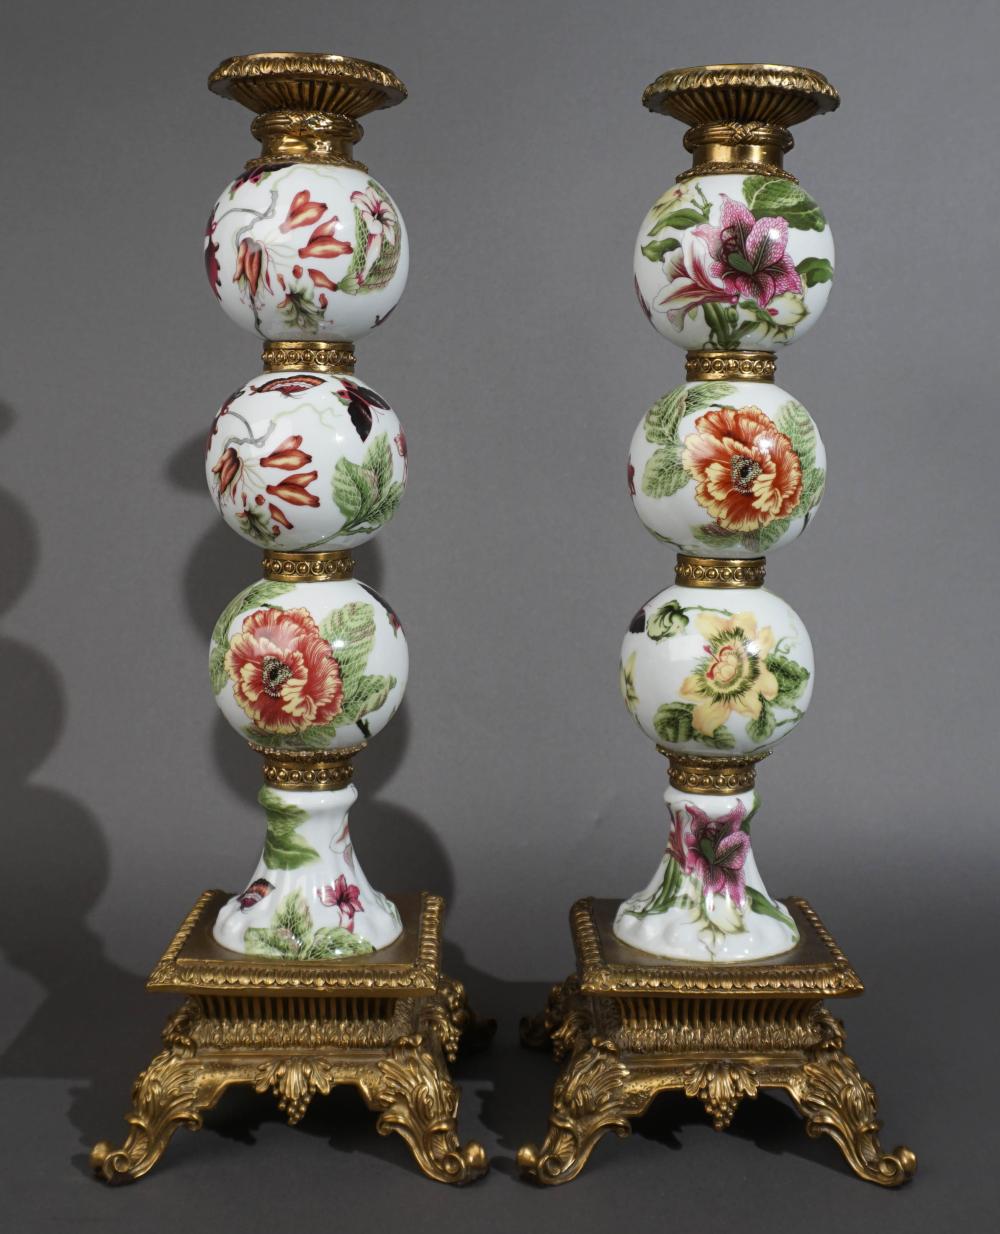 PAIR LOUIS XV STYLE PORCELAIN AND 2e7f02